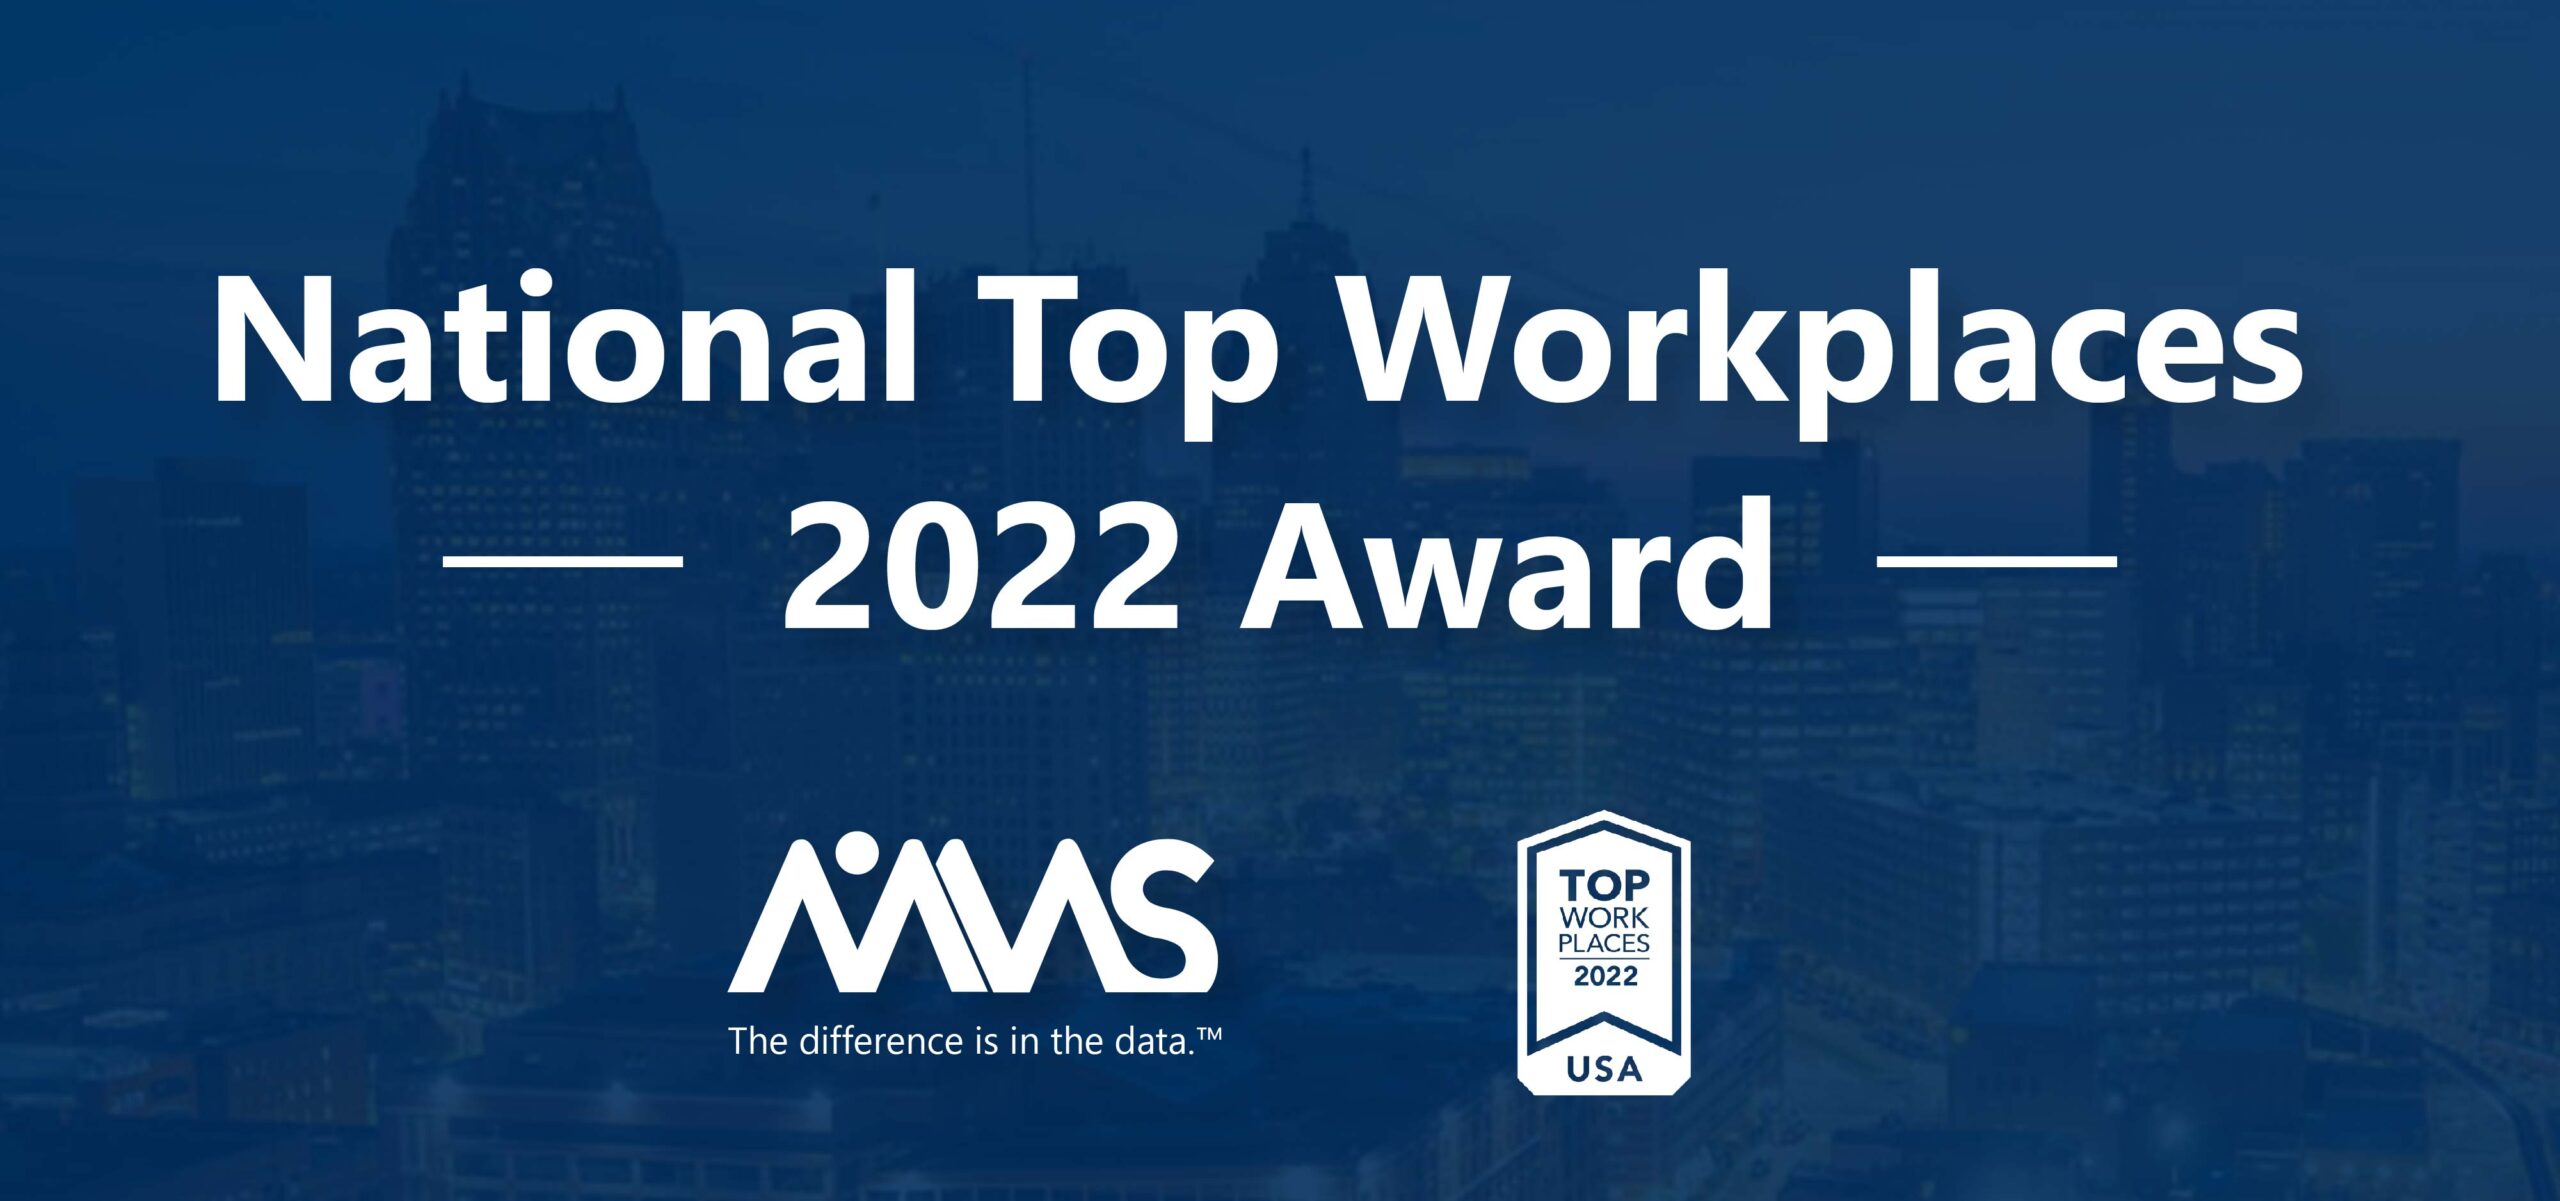 MMS Holdings Only Michigan Pharma Organization Awarded a 2022 Top Workplace USA Recognition